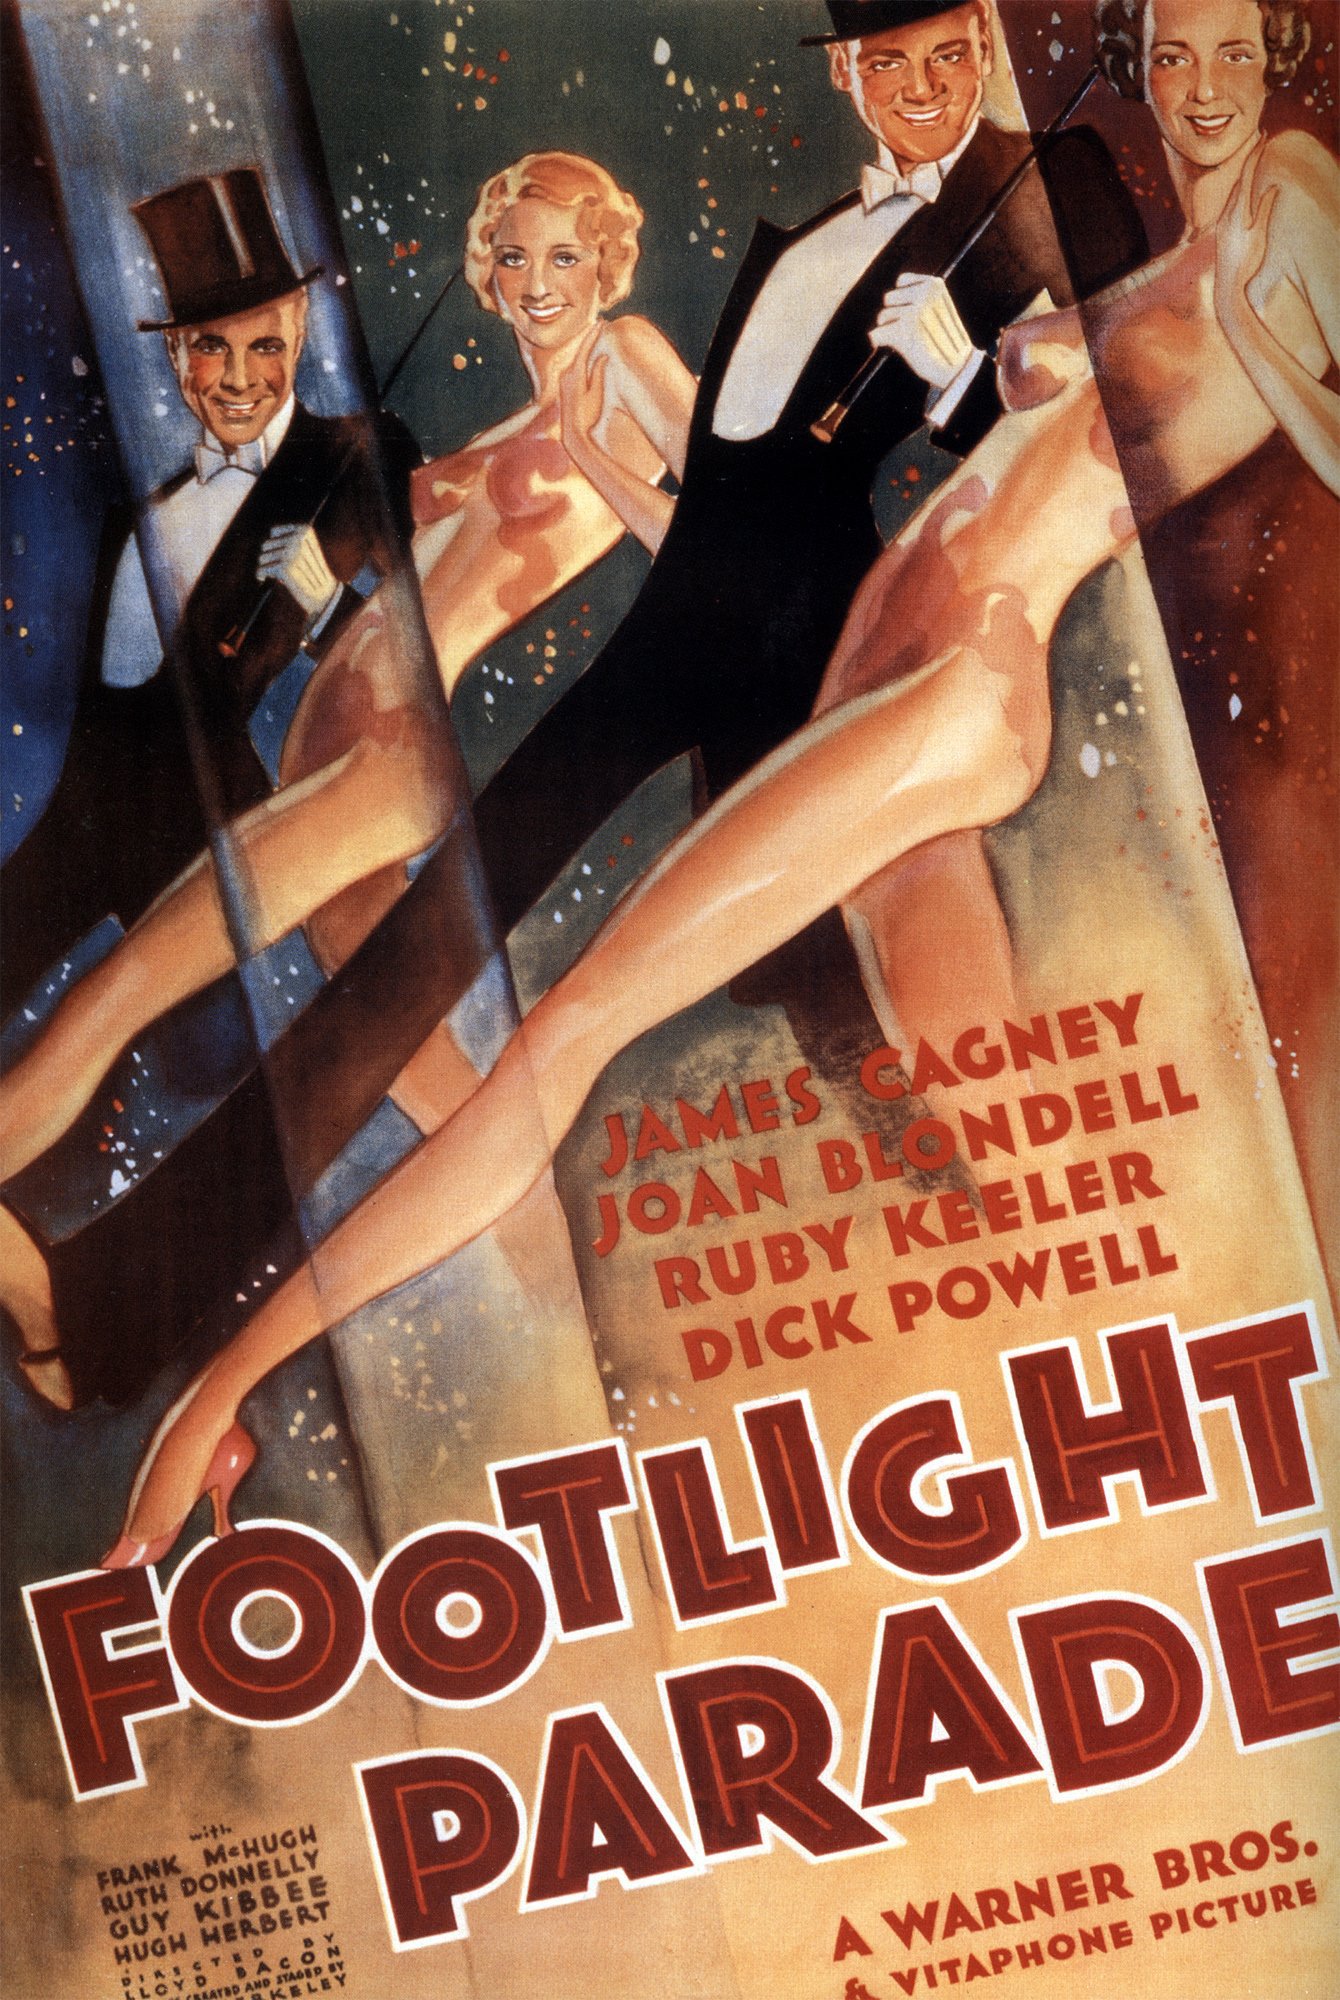 James Cagney, Joan Blondell and Ruby Keeler in Footlight Parade (1933)